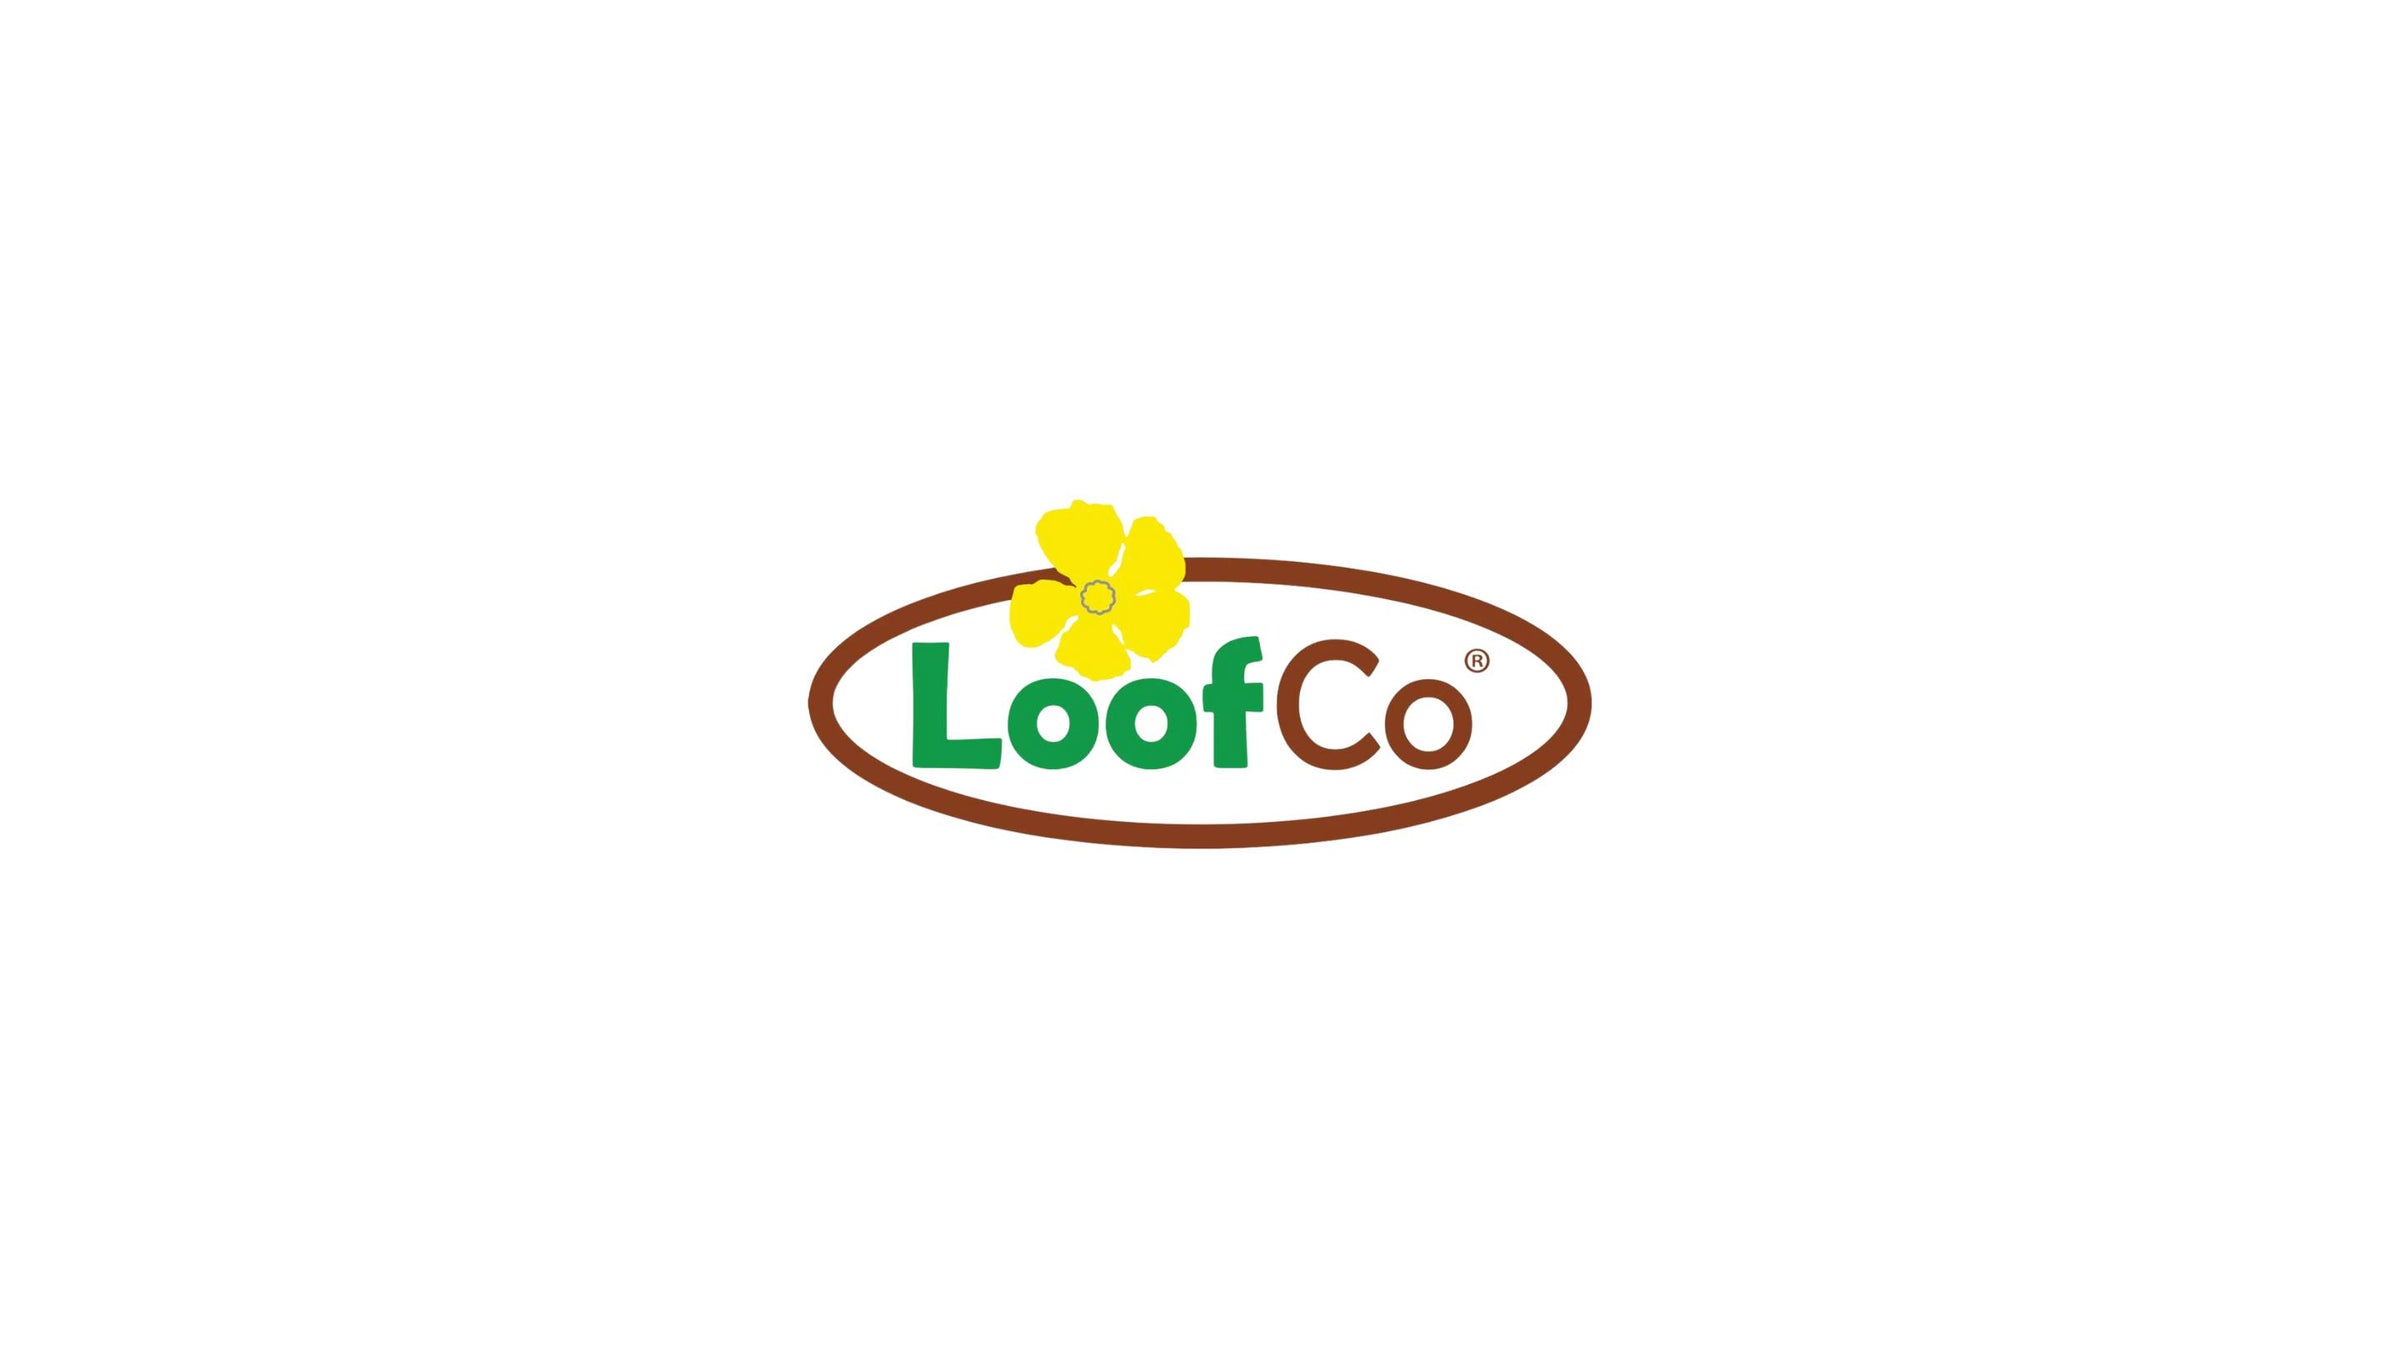 loof co logo. Loof in green bold text and co in brown light text. the words are in a brown oval with a yellow flower in the left corner